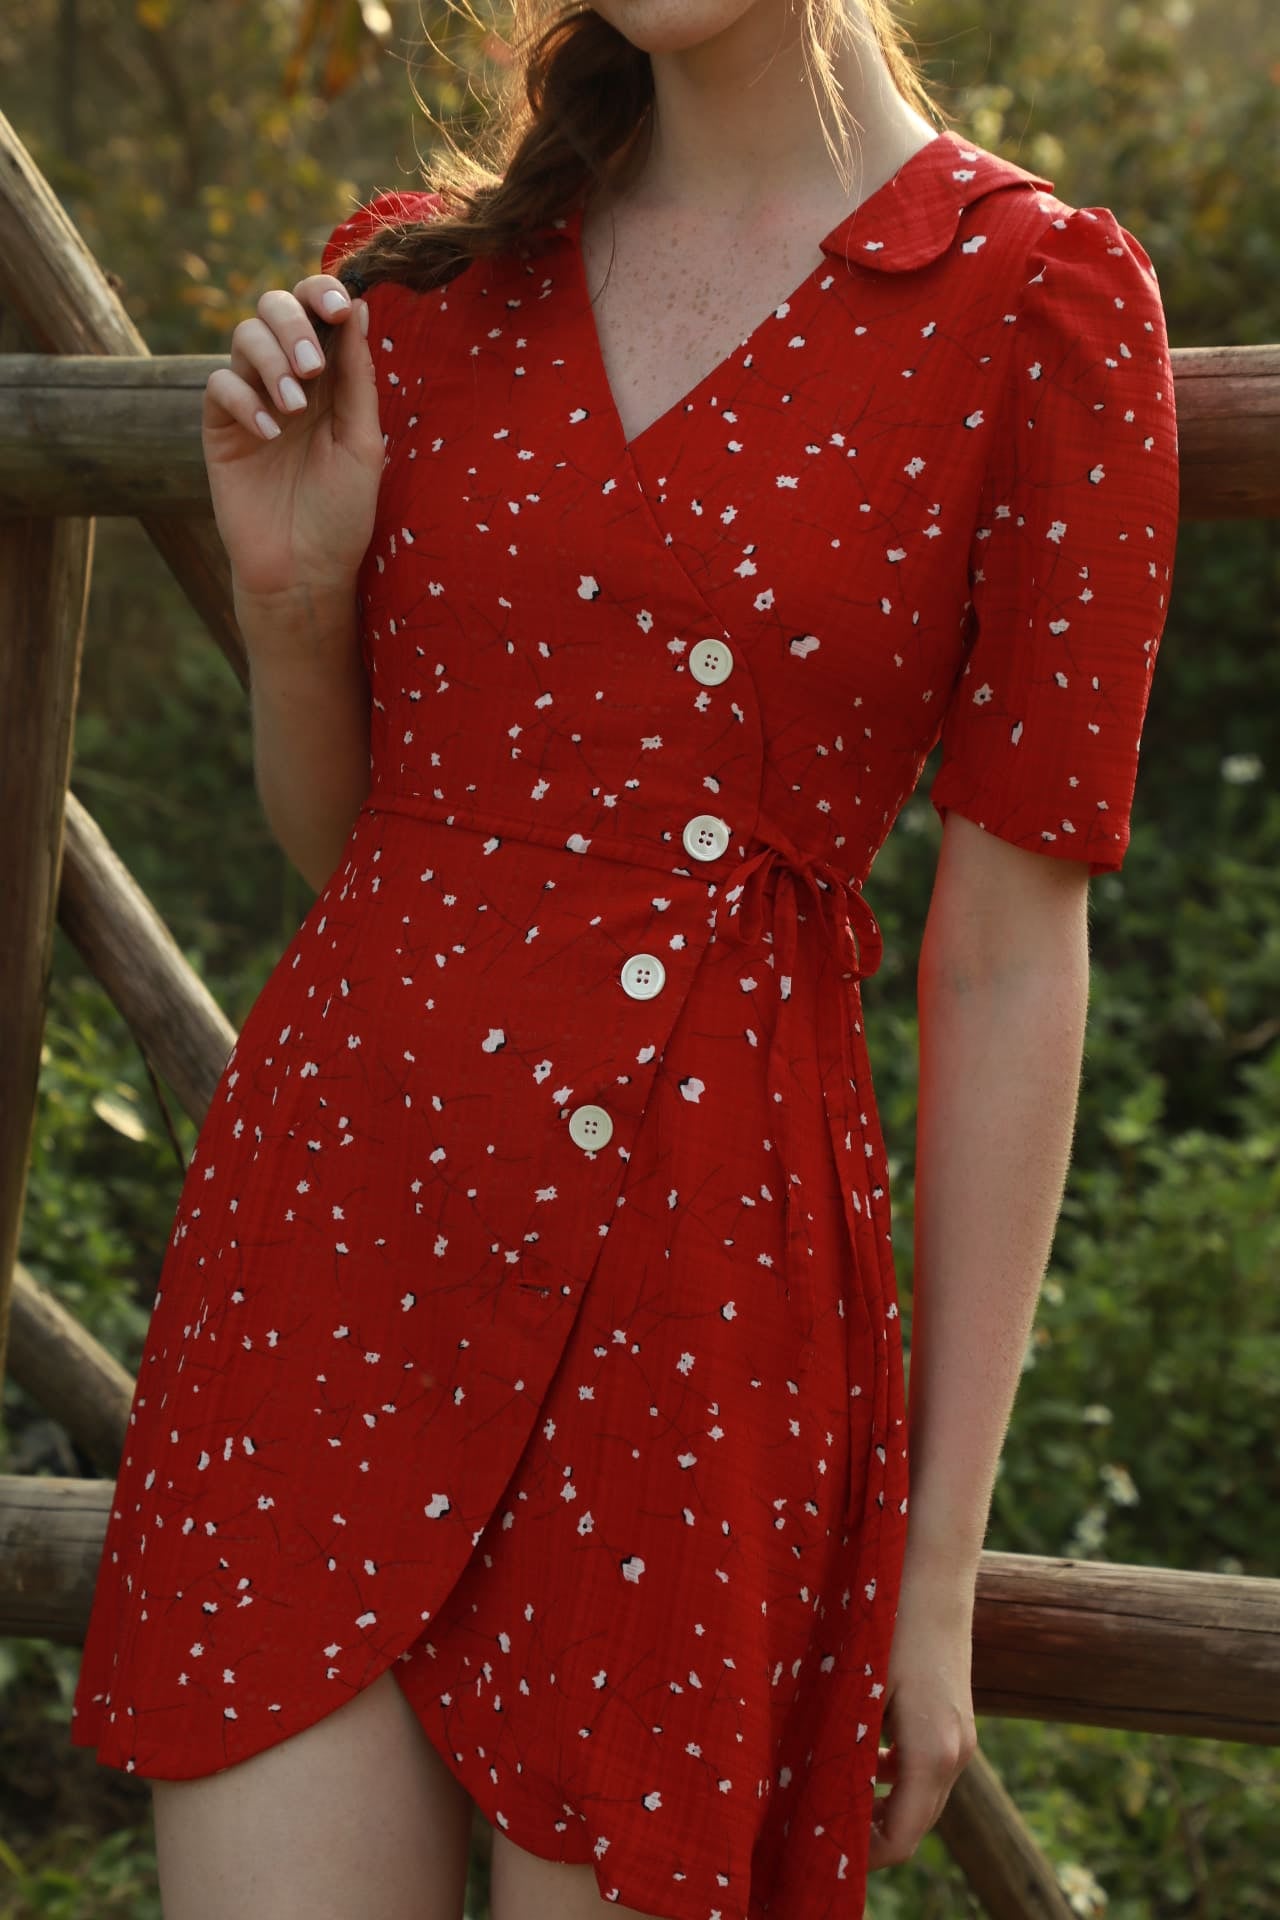 Red Special Collar Tea-length Dress - By Quaint